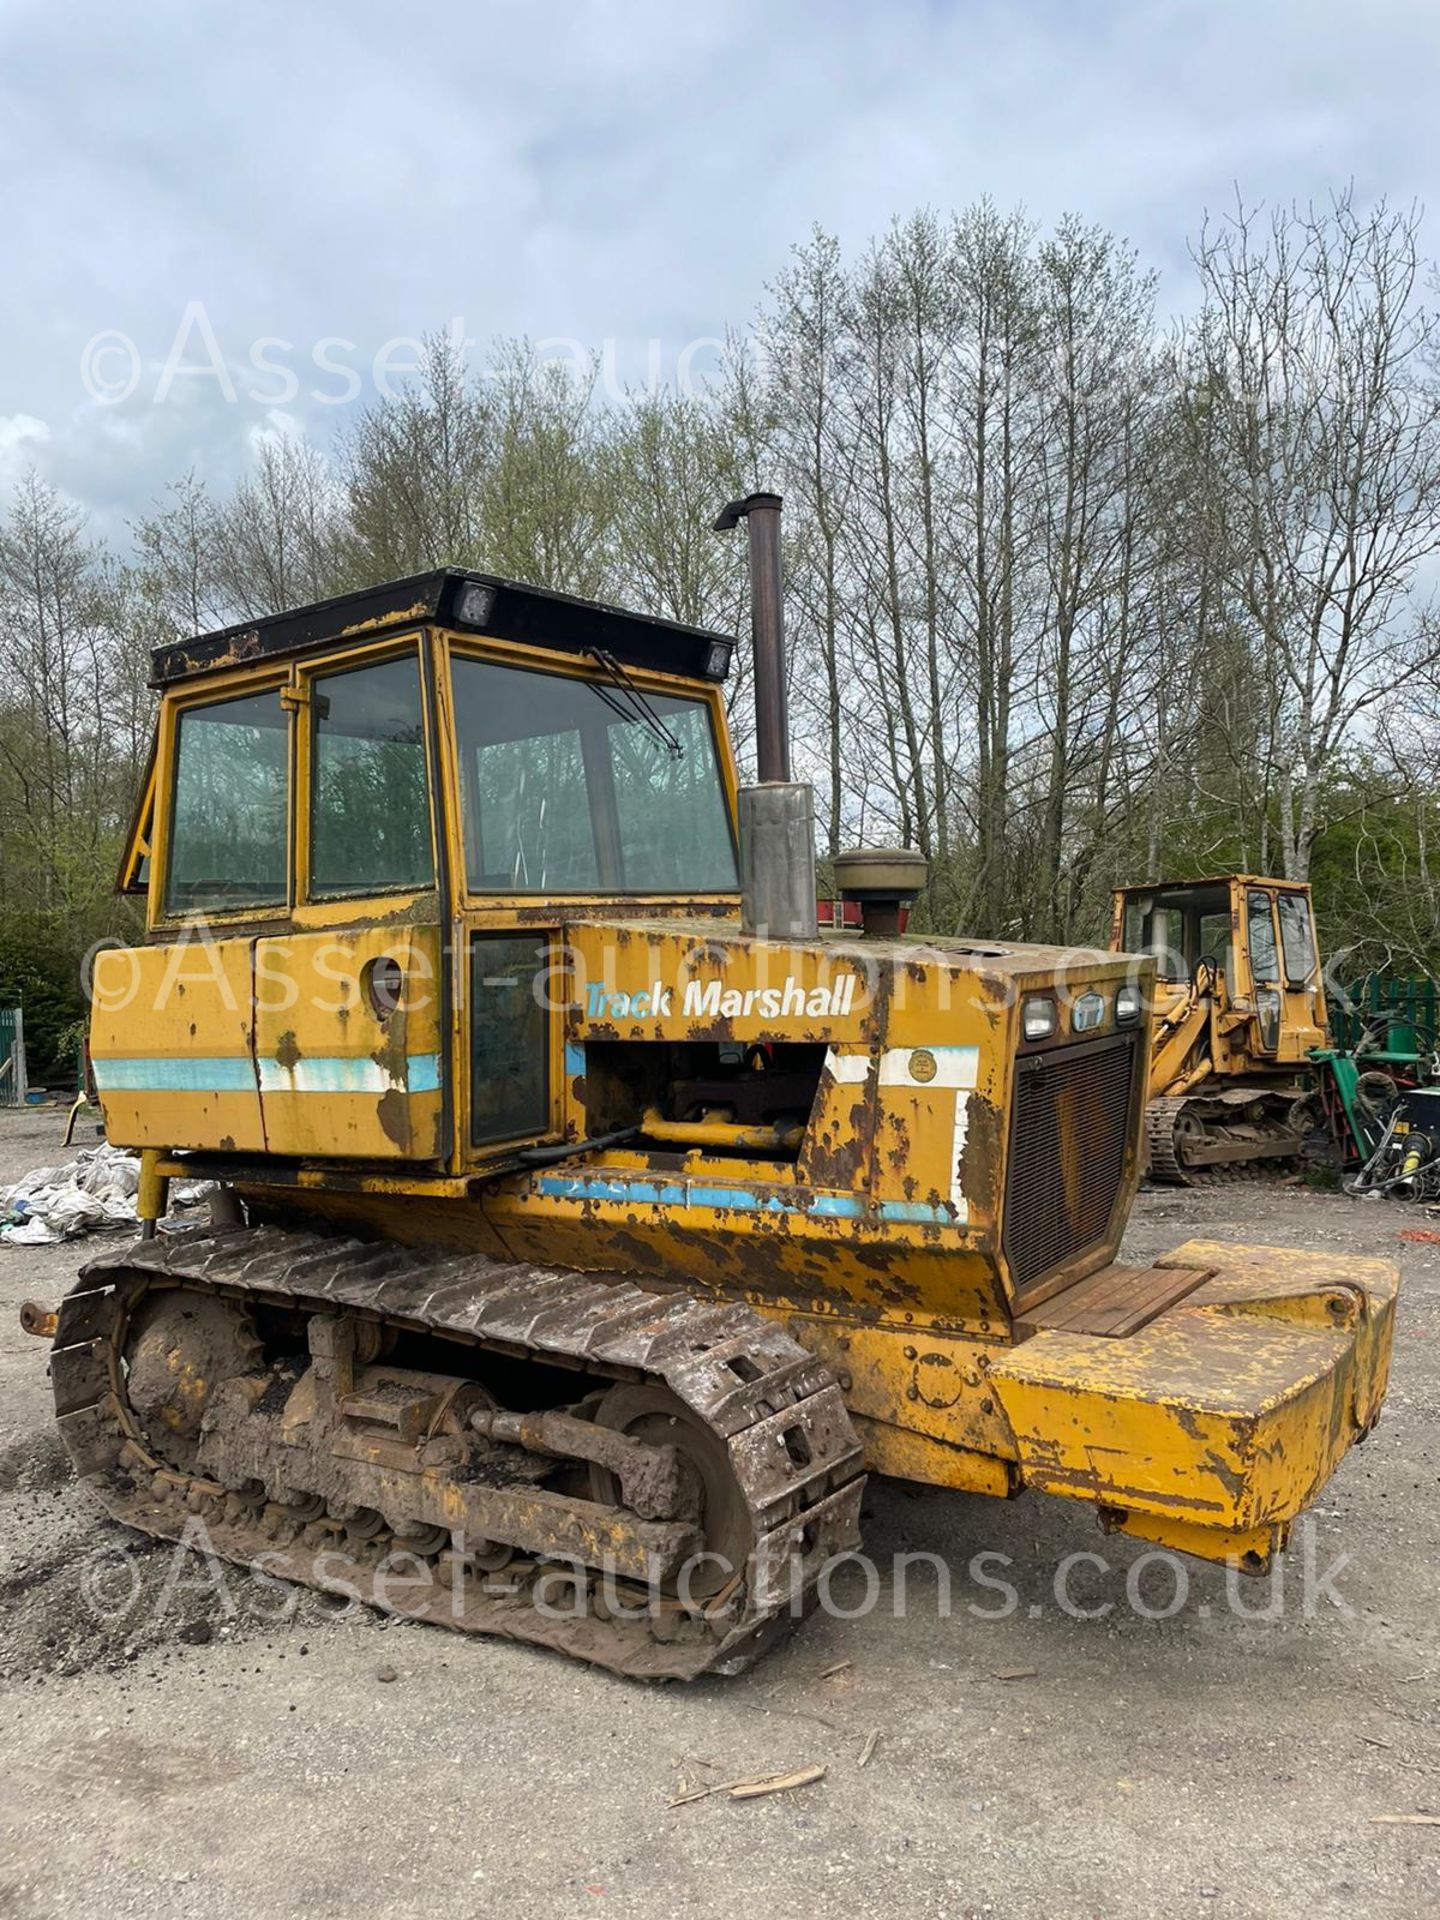 TRACK MARSHALL 135 DOZER DROT, 3781 HOURS, REAR ARMS WITH 3 POINT LINKAGE, RUNS DRIVES AND LIFTS - Image 3 of 14